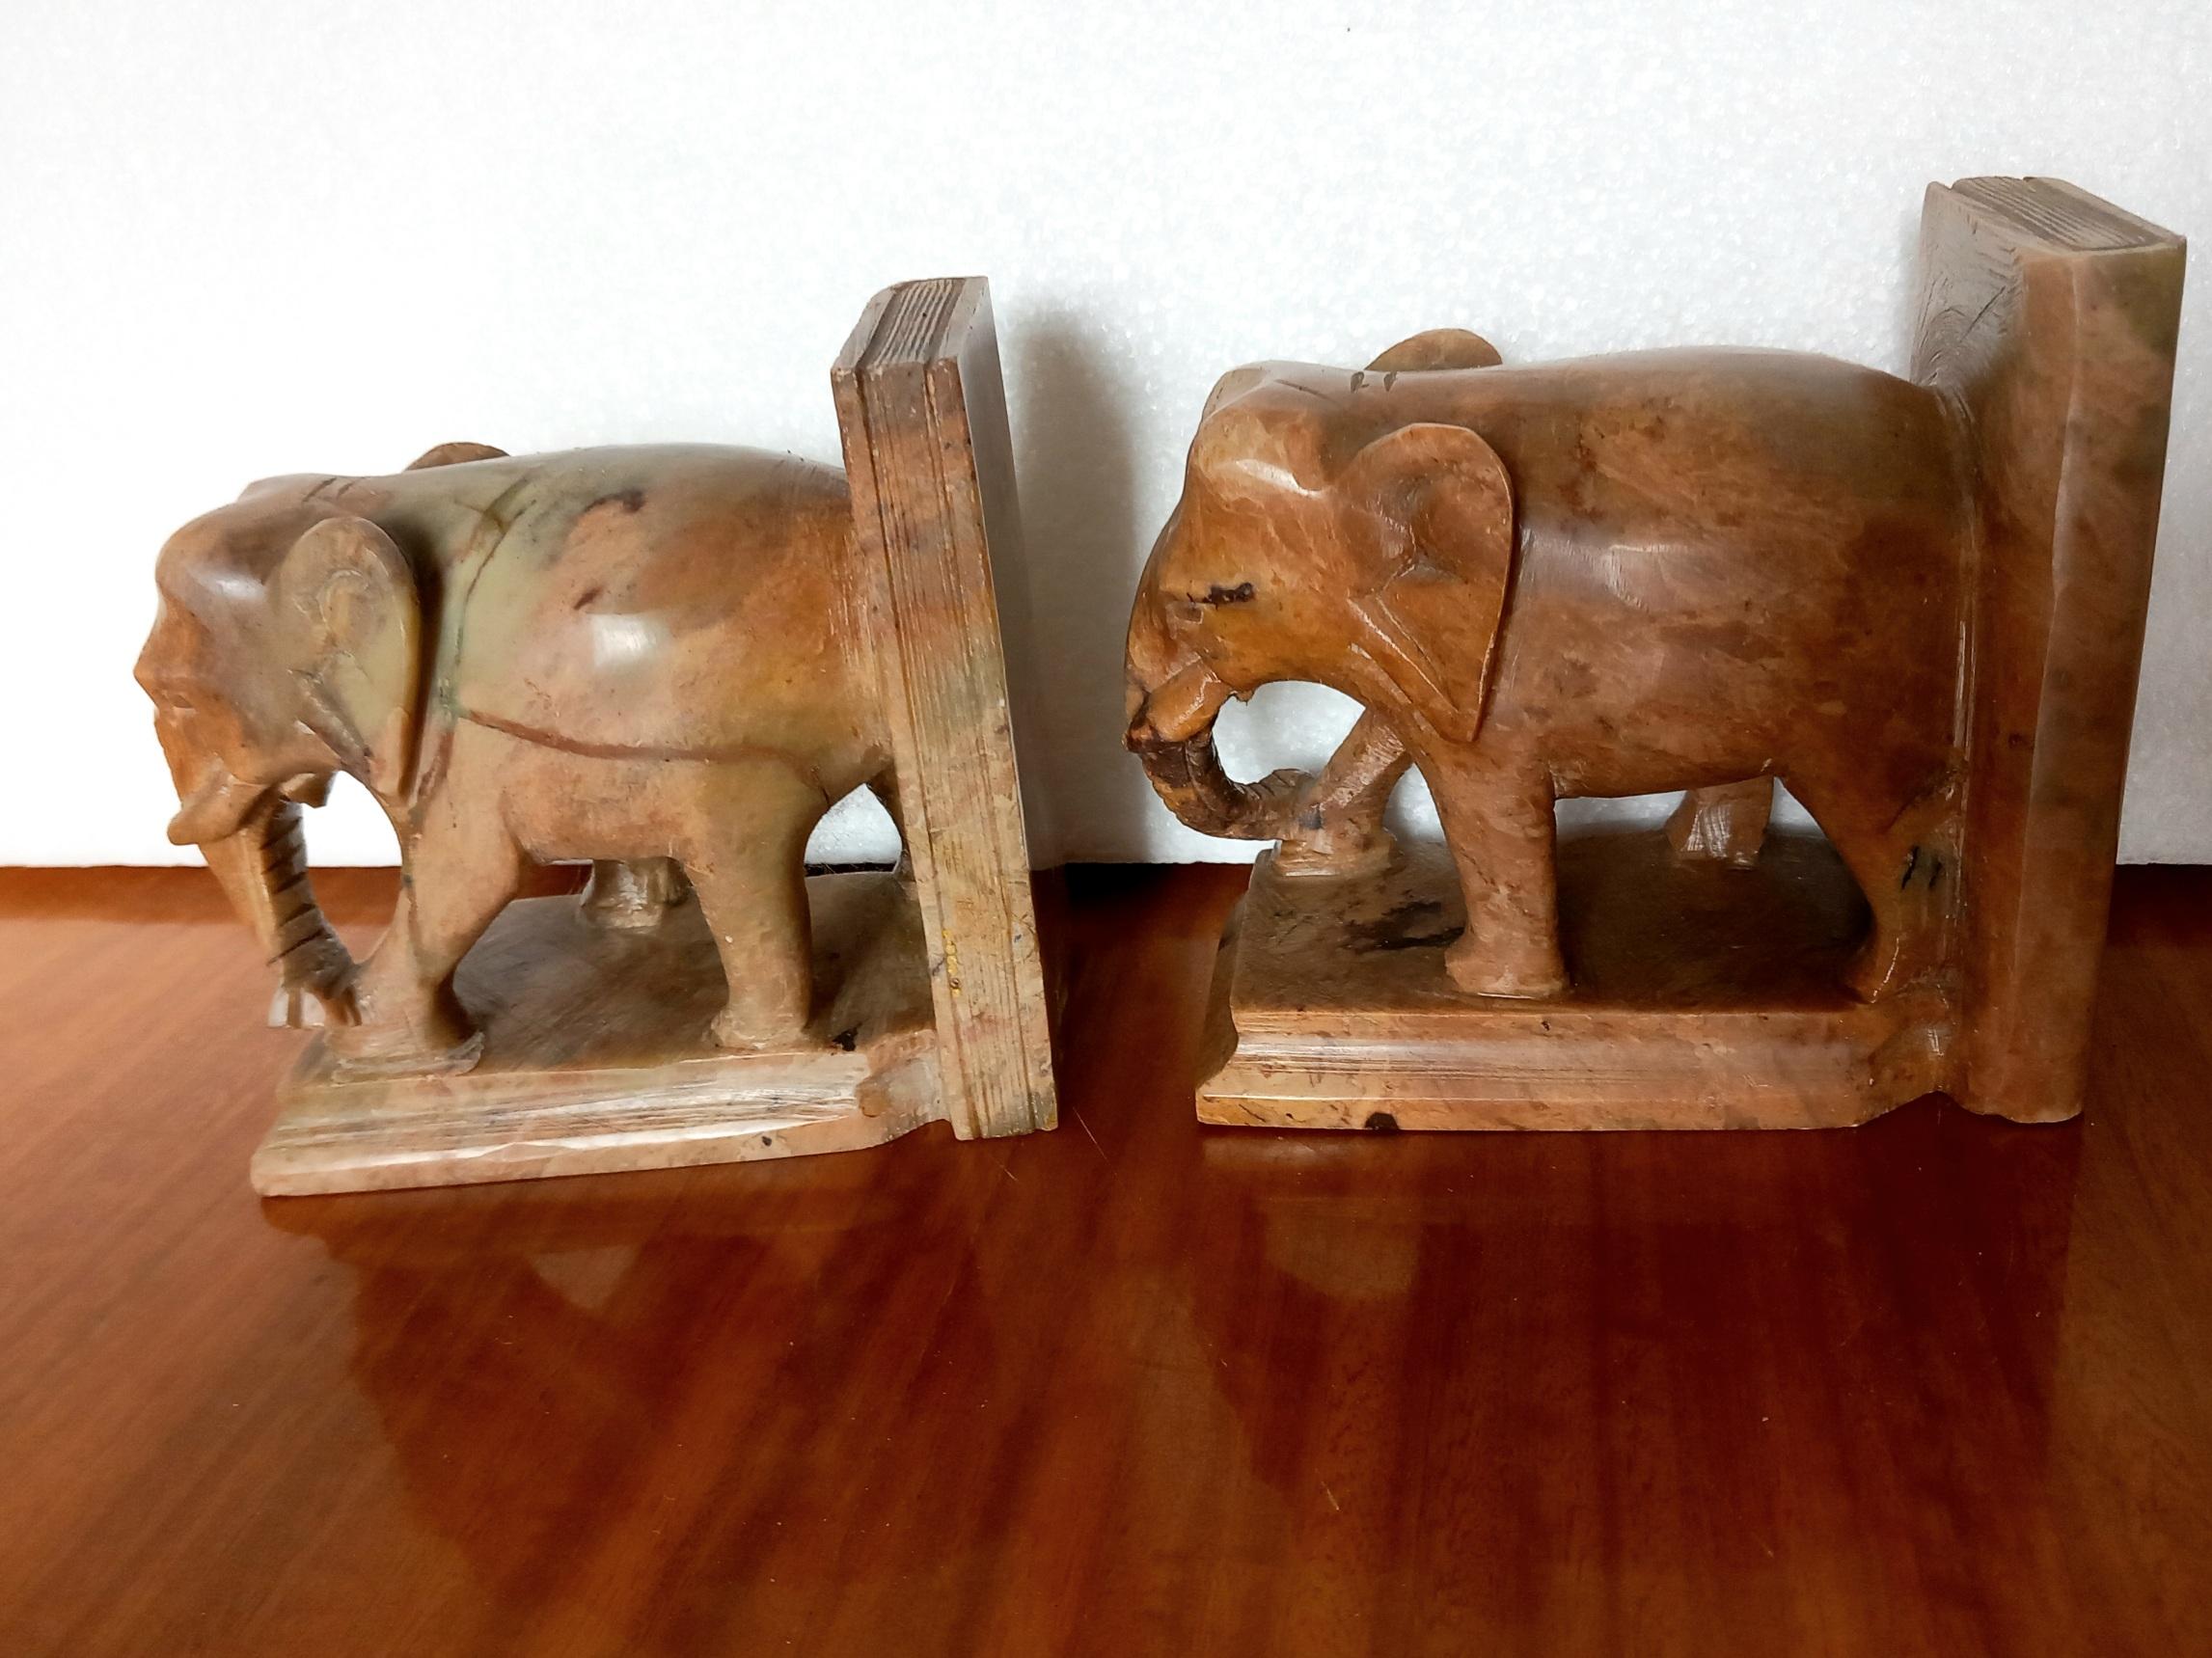 Art Deco bookends,marble or alabaster bookends in the shape of an elephant.
Nice figure of elephant in toasted oclor marble.
 Your condition is perfect, like new.

These figures carved in Spain or Italy, it is difficult to specify due to the